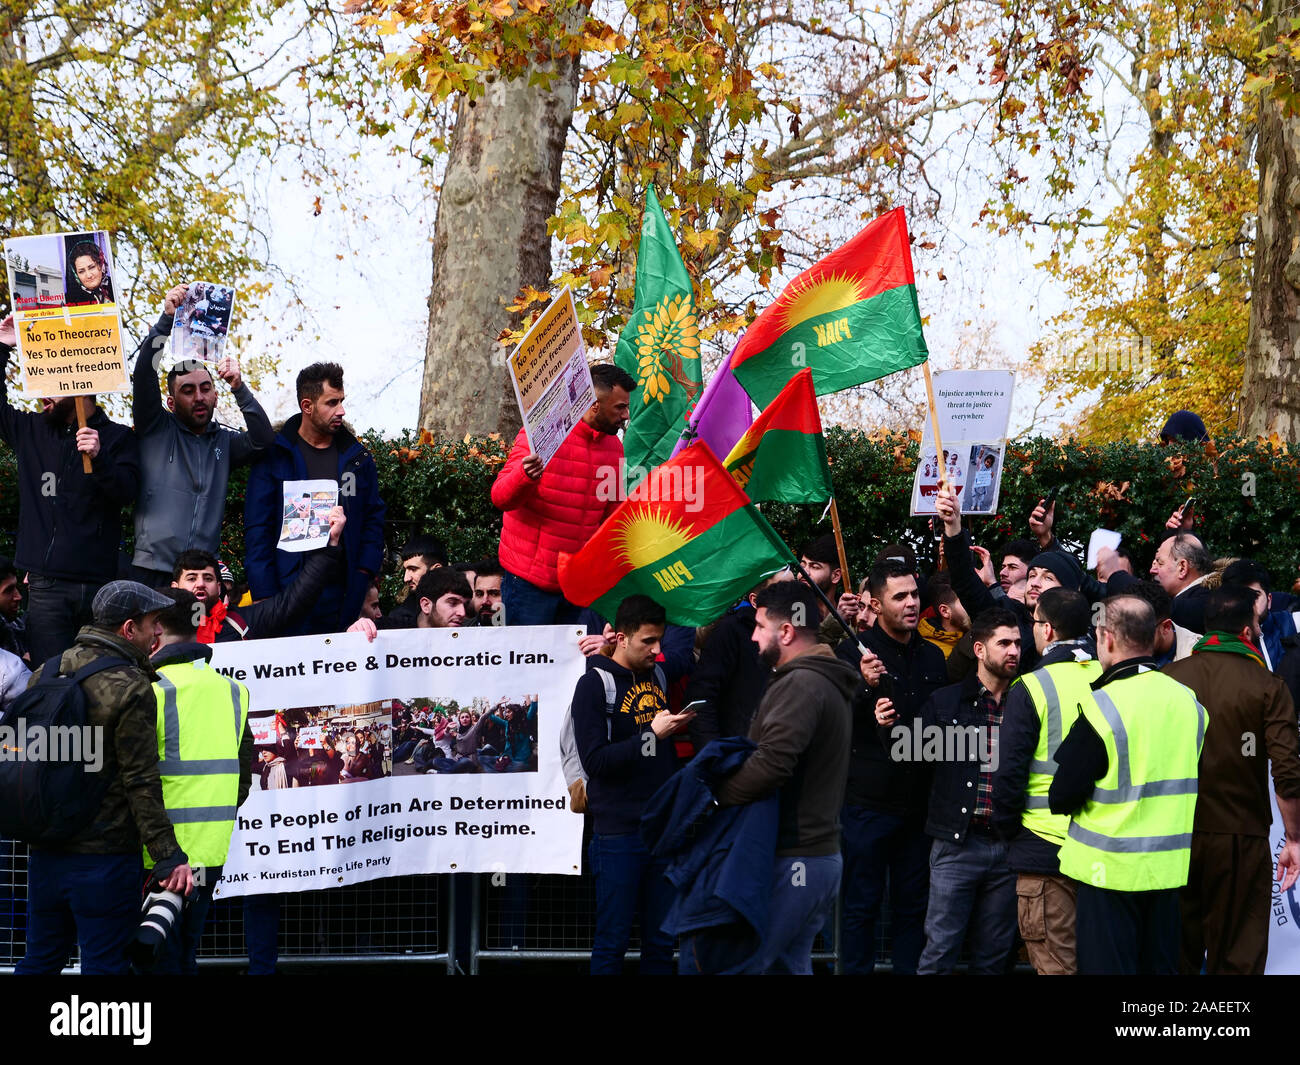 London, UK. 20th November, 2019. Iranians from London protest outside the Iranian embassy against the alleged abuses by the government of Iran, demanding democracy and freedom for the Kurdish population. Credit: Joe Kuis / Alamy News Stock Photo